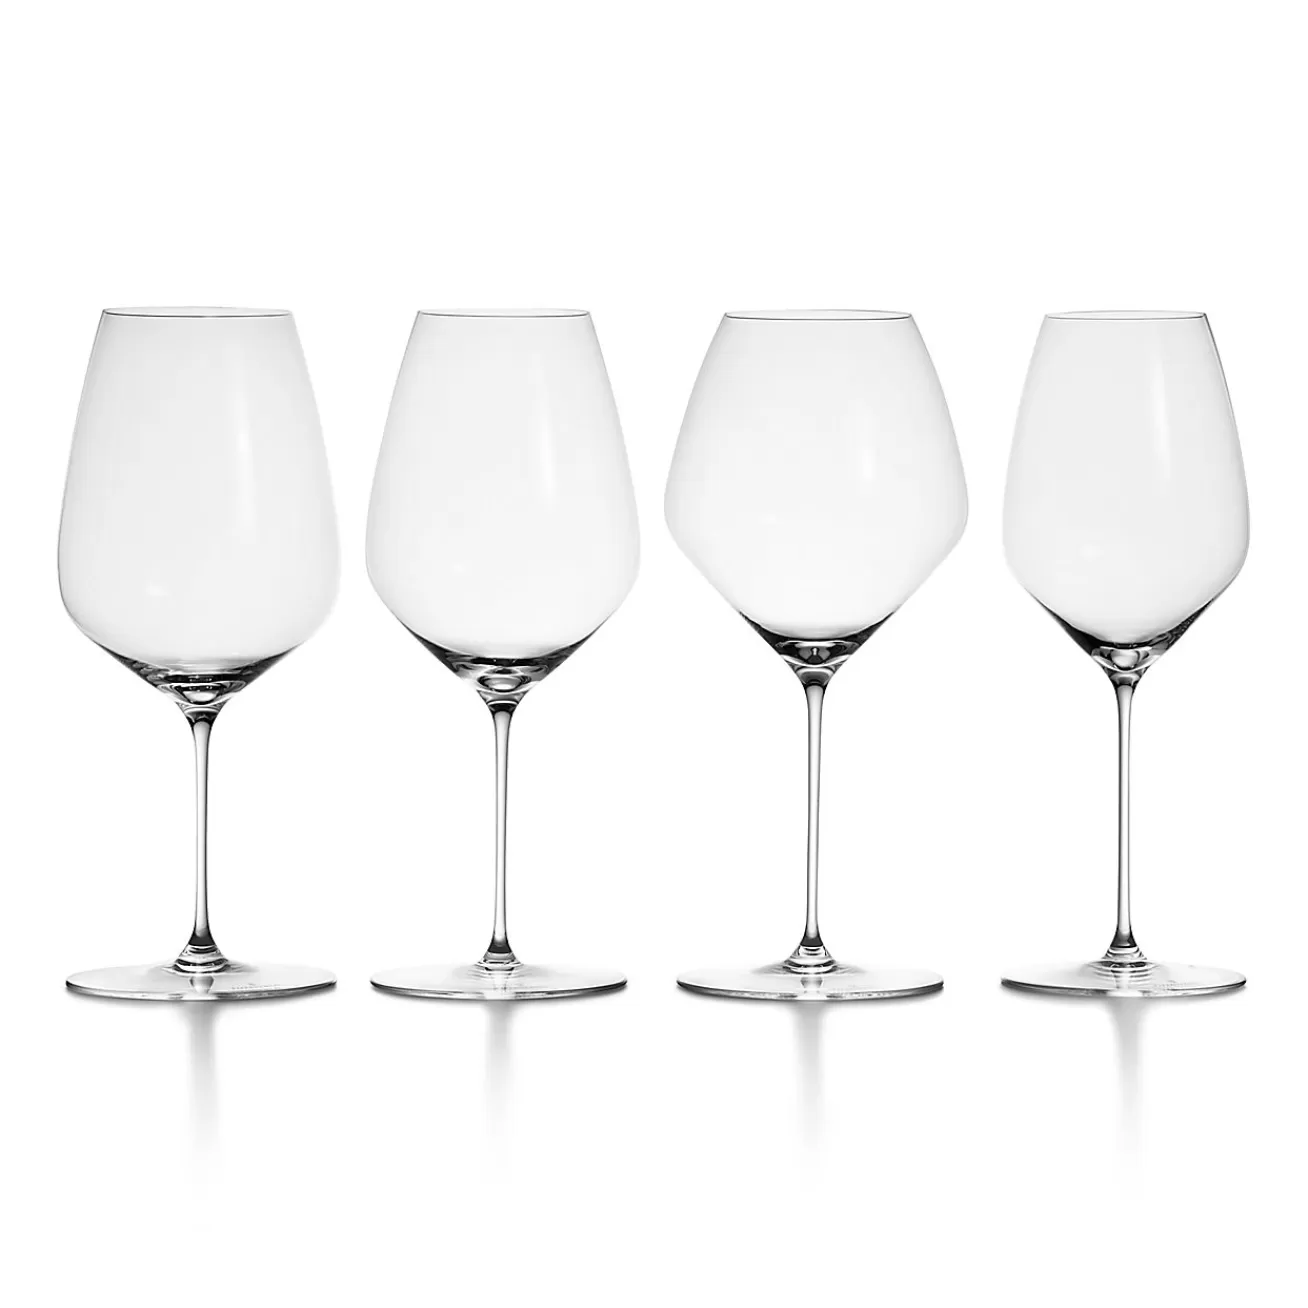 Tiffany & Co. Tiffany Connoisseur Tasting Glass in Crystal Glass, Set of Four | ^ Him | Gifts for Him